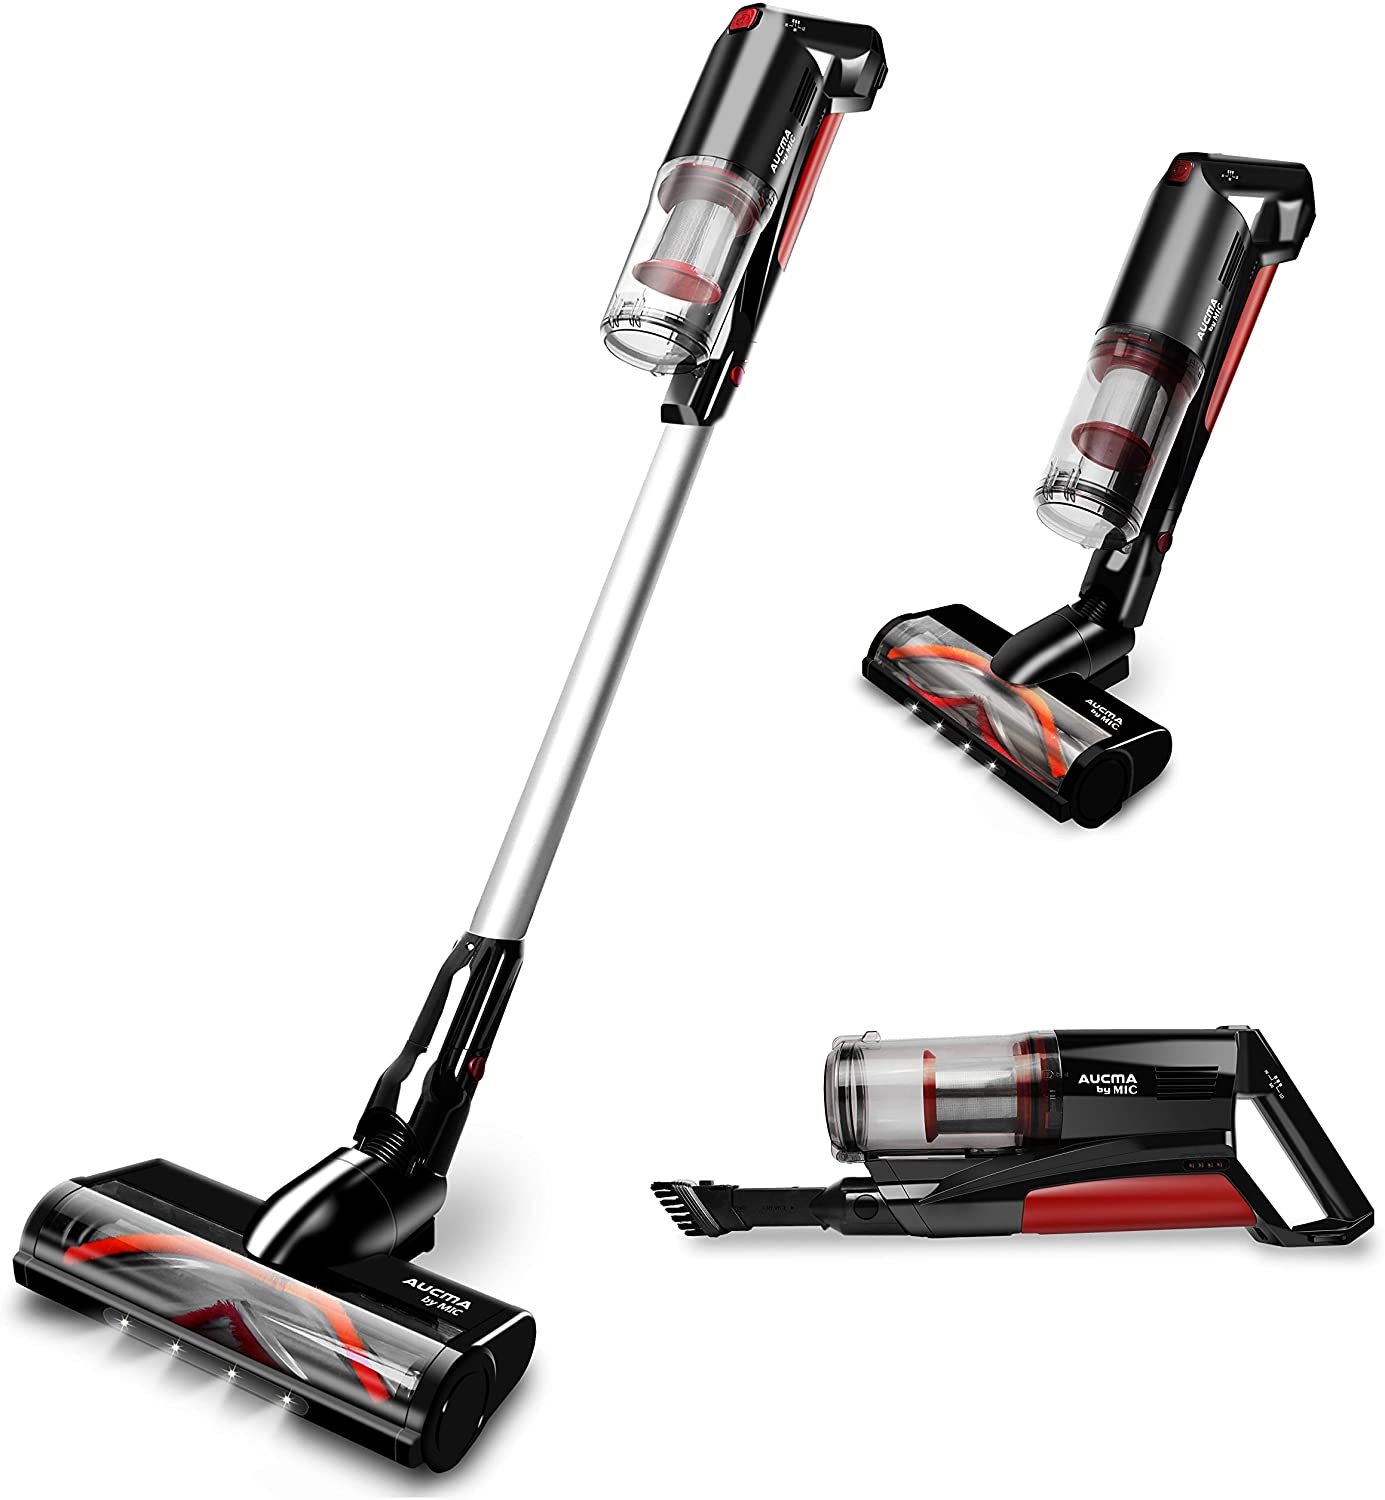 MIC Cordless Vacuum Cleaner, 20000Pa Stick Vacuum, 5 in 1 Handheld Lightweight Vacuum with Removable Battery, 3 Adjustable Suction, Up to 50 Mins Working.